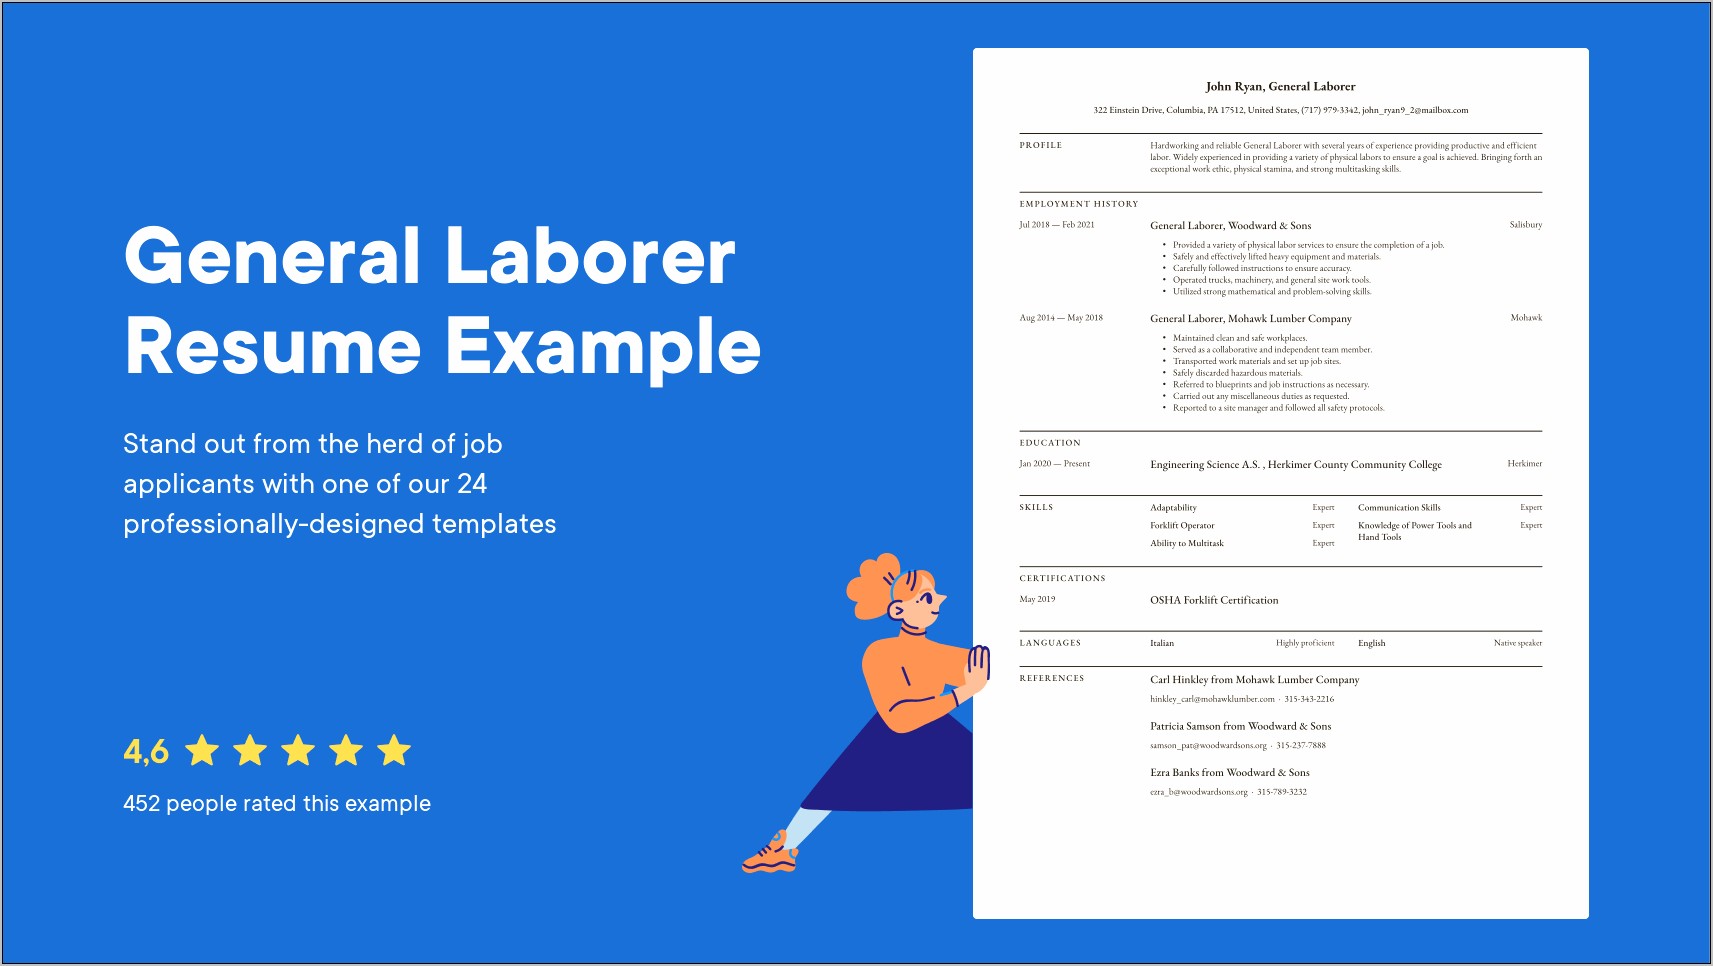 Example Resume For Dpw Laborer